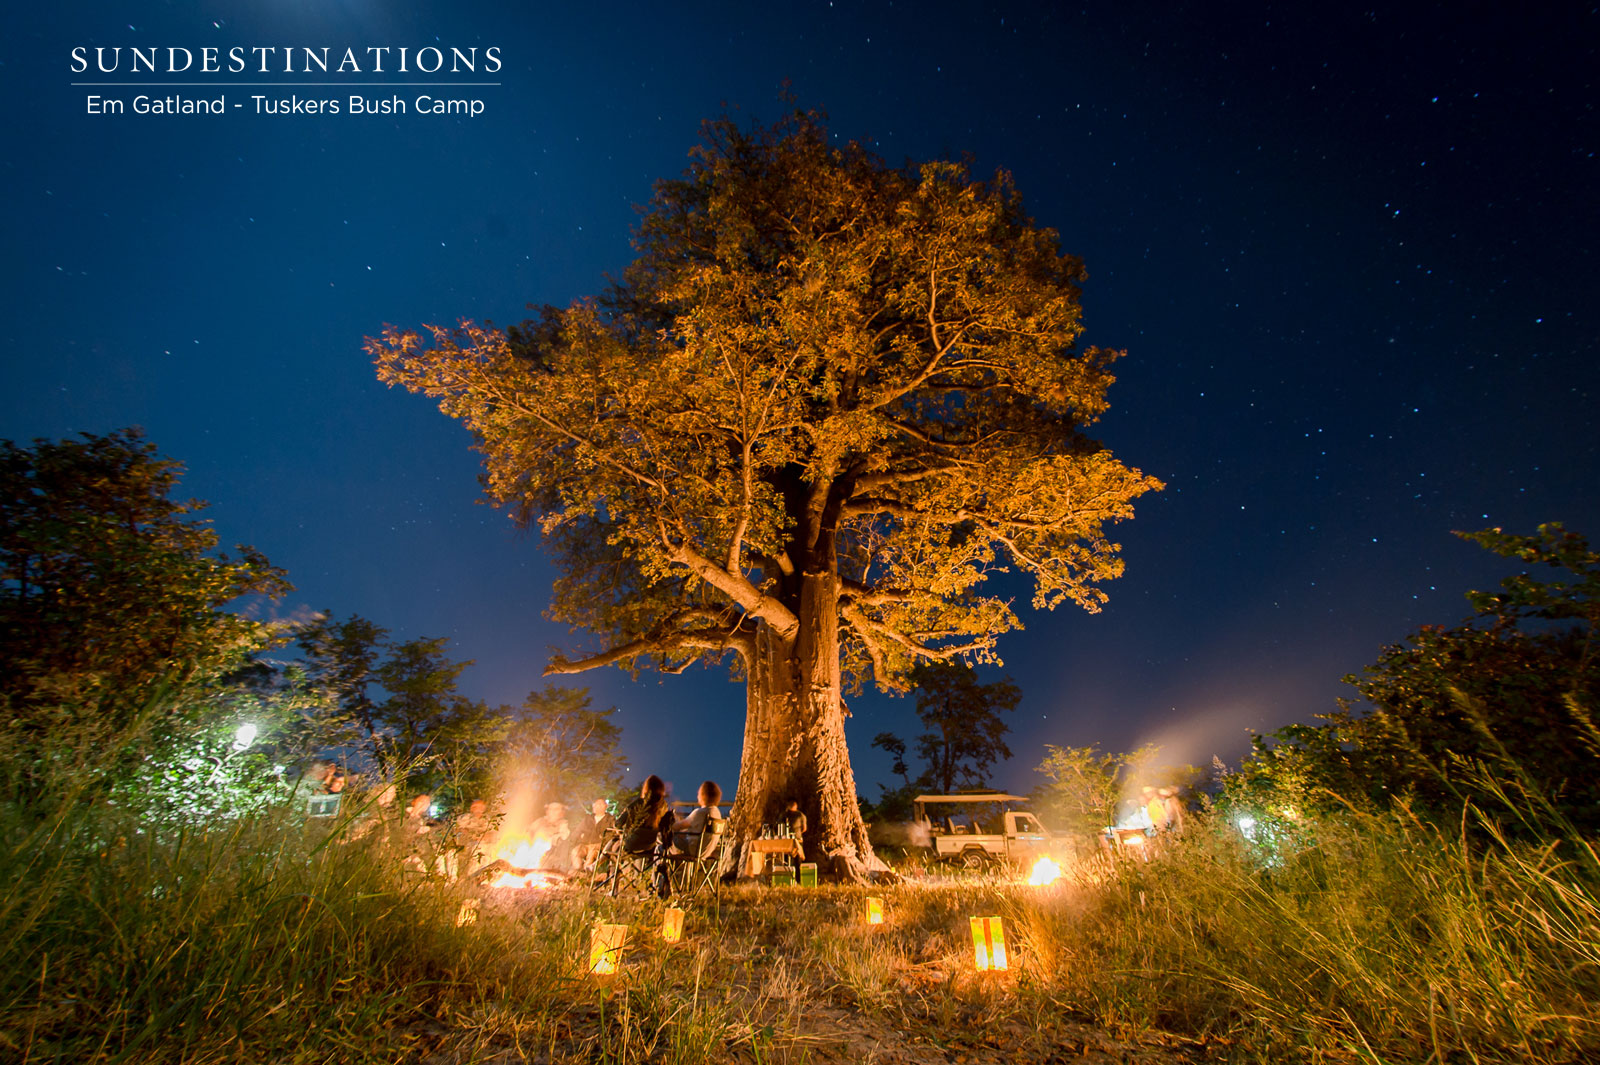 Dinner Under the Baobab at Tuskers Bush Camp